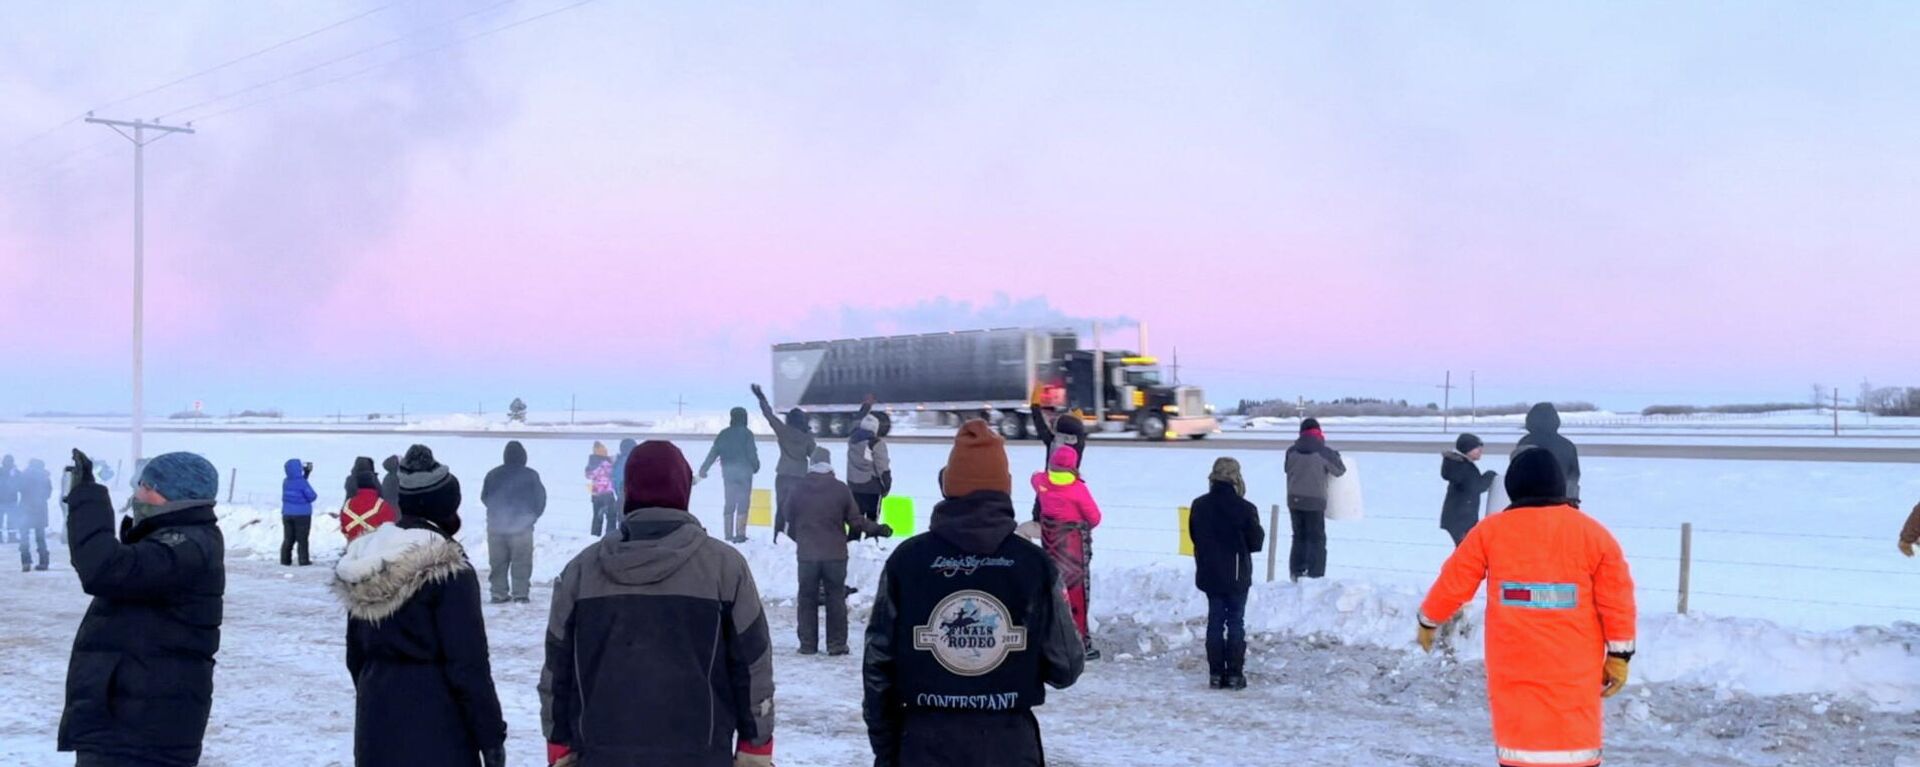 Family, friends and neighbours gather to show support for the freedom convoy on the Trans-Canada highway in Grenfell, Saskatchewan, Canada January 25, 2022 in this screenshot obtained from a video on social media - Sputnik International, 1920, 23.02.2022